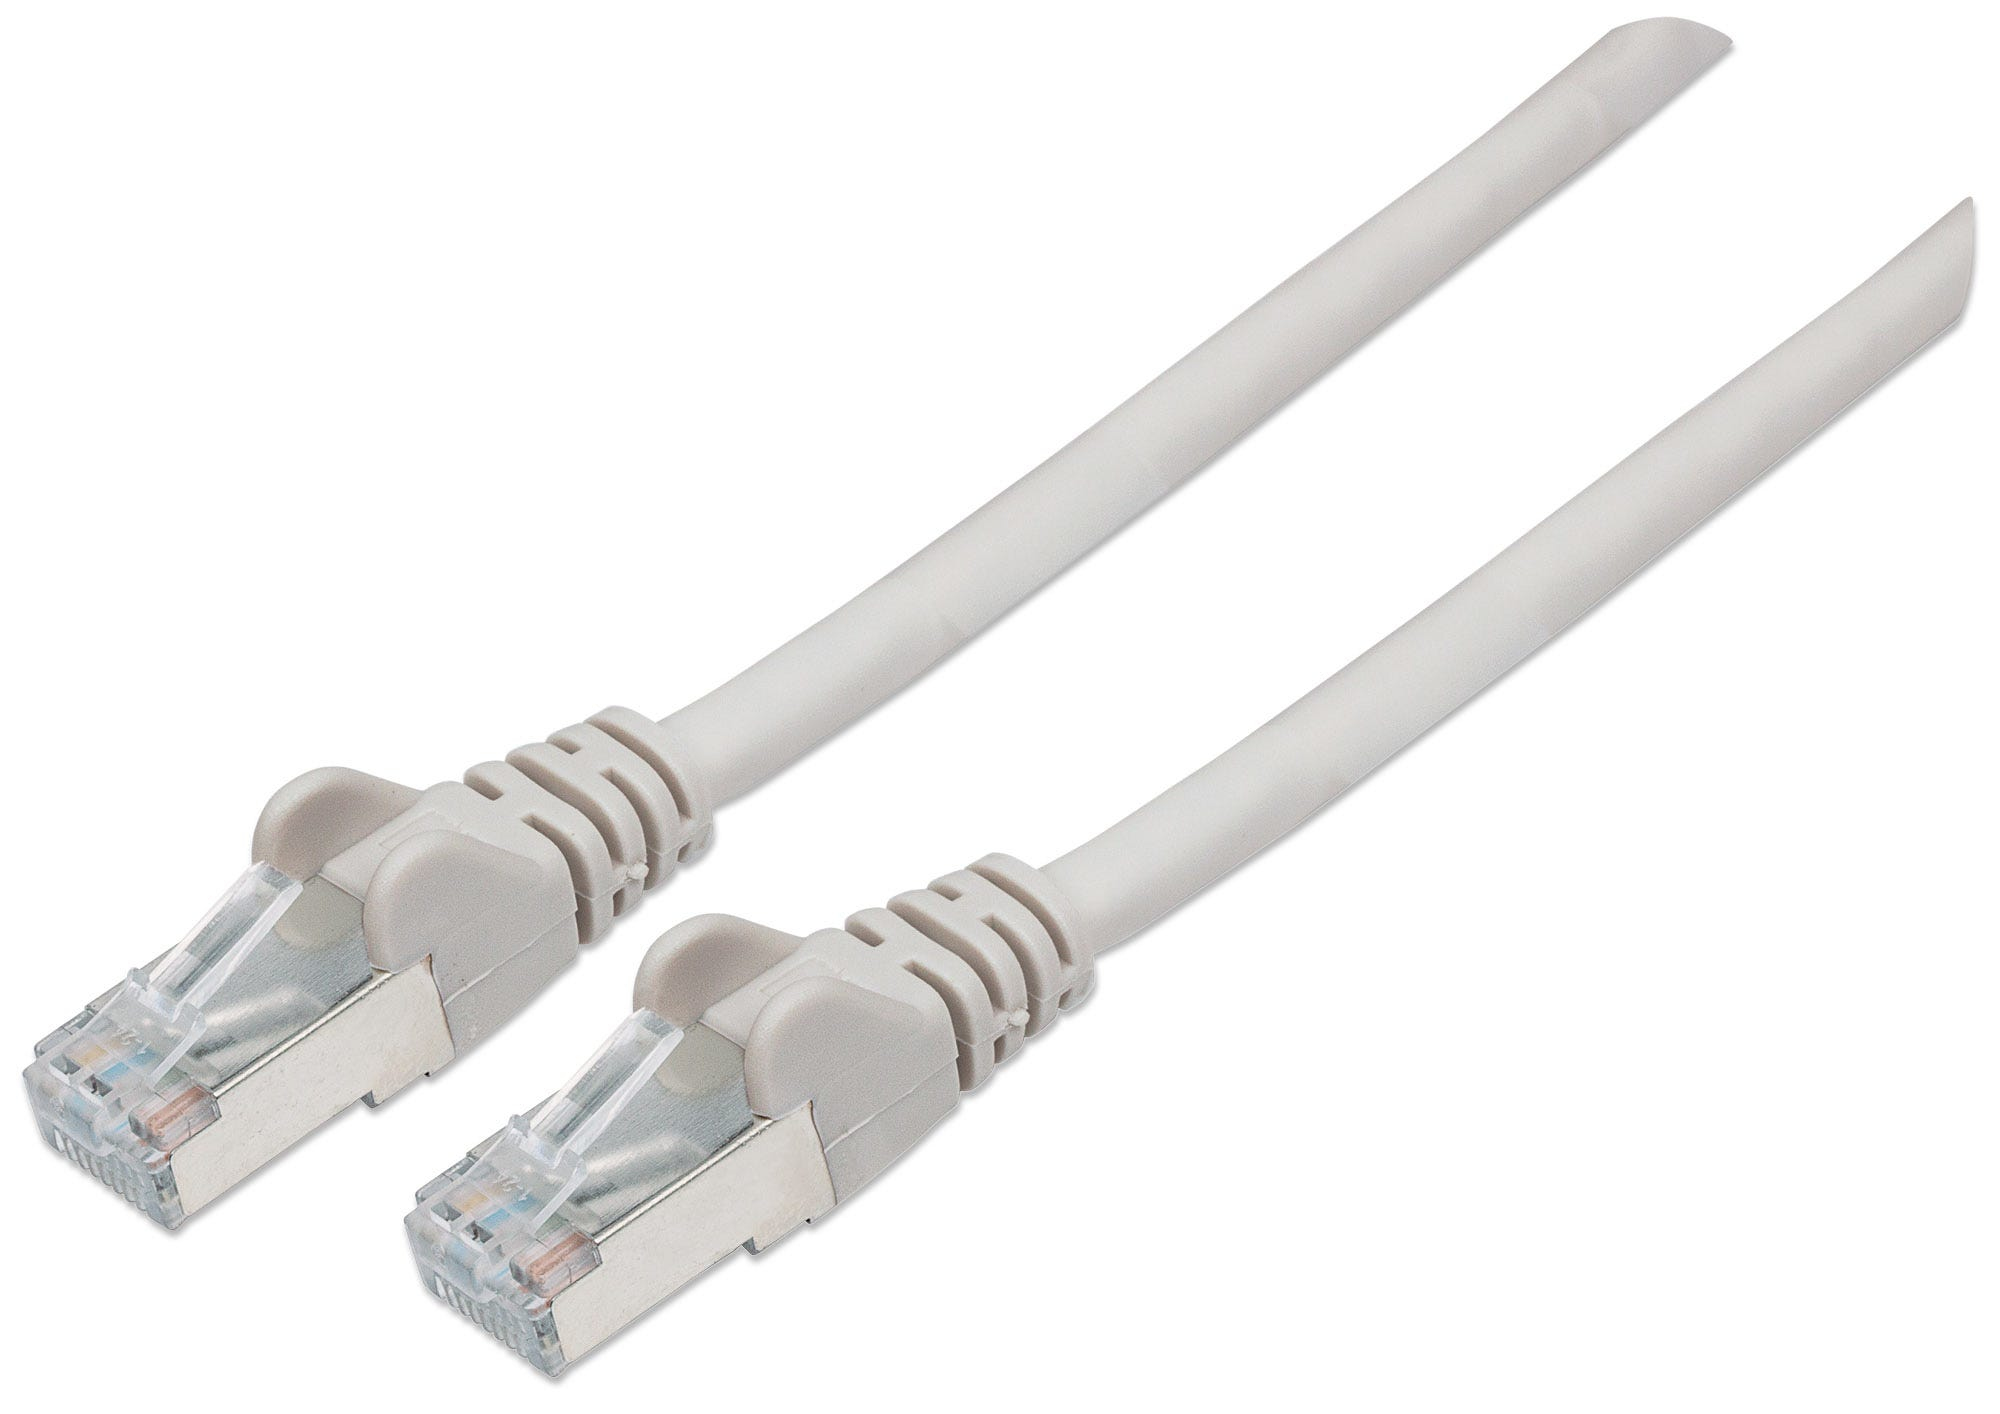 Photos - Cable (video, audio, USB) INTELLINET Network Patch Cable, Cat6, 3m, Grey, Copper, S/FTP, LSOH / 7361 